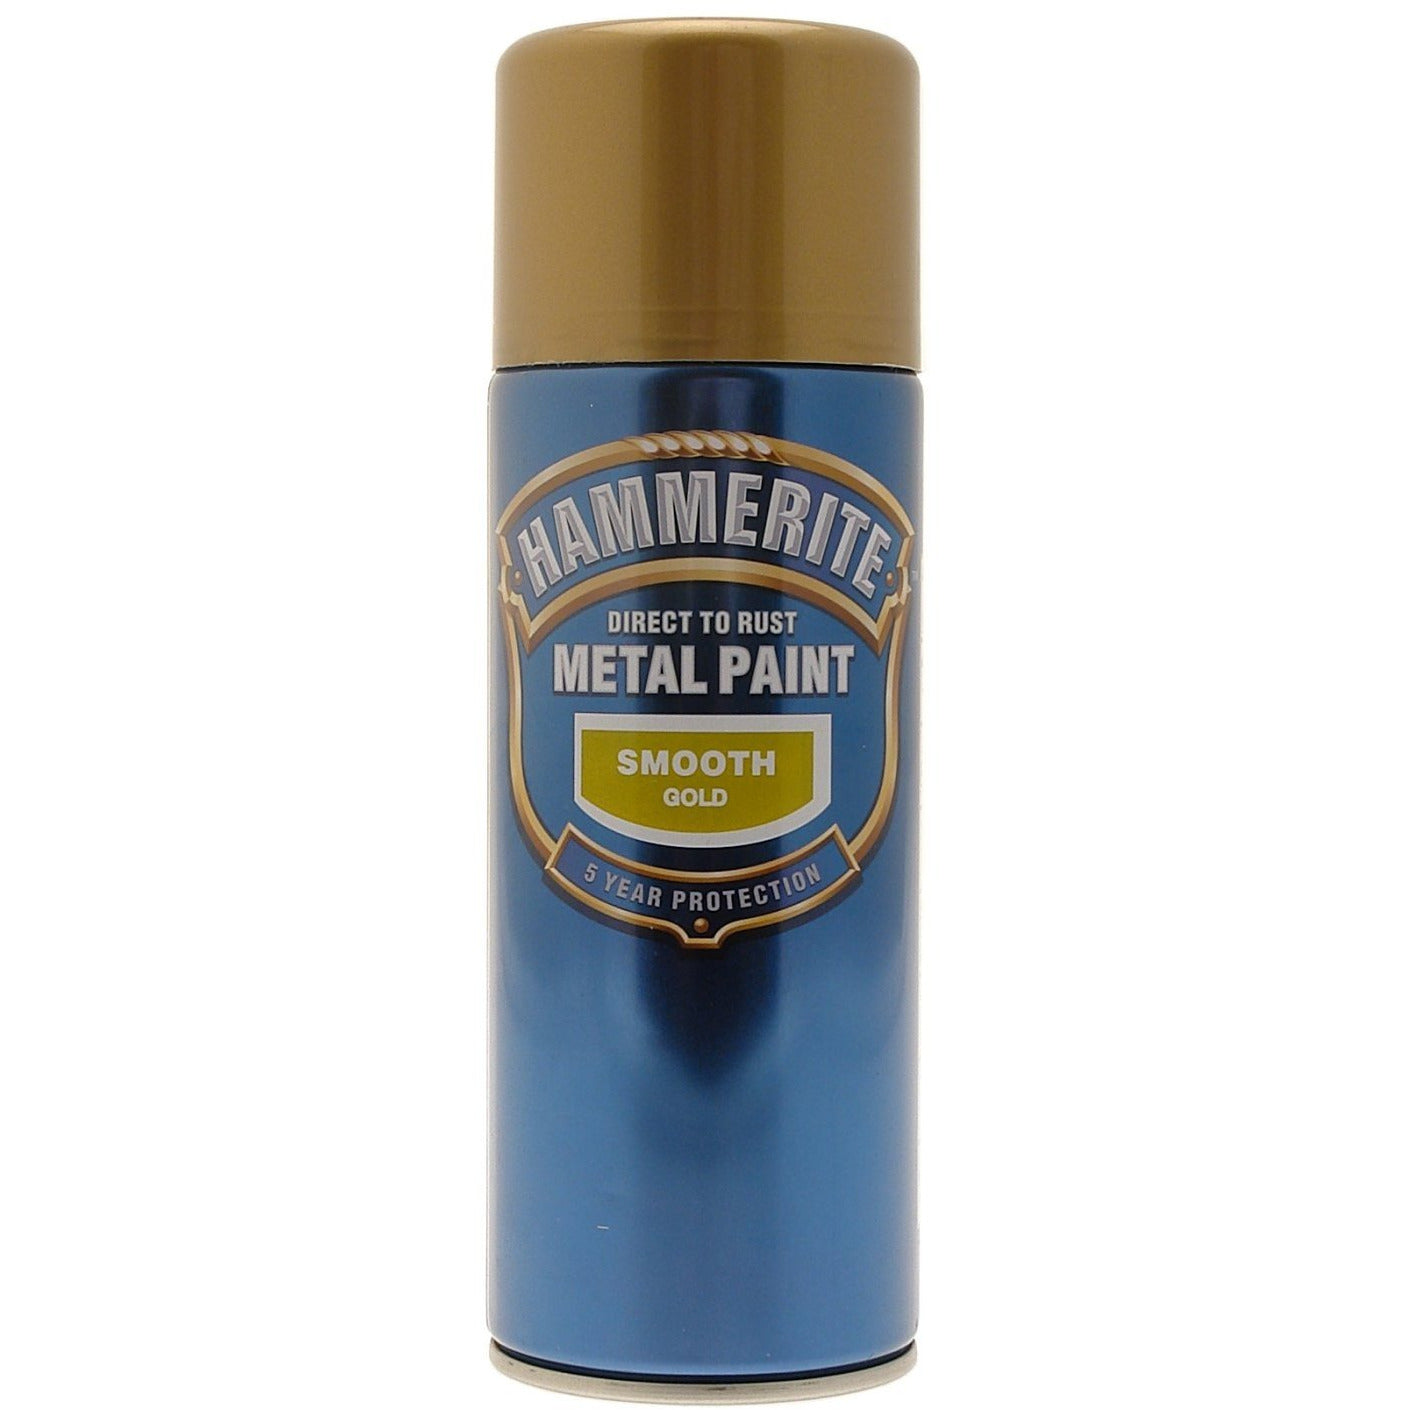 Hammerite Direct to Rust Metal Paint Smooth Gold 400ml Aerosol-Metal Protection & Paint-Tool Factory